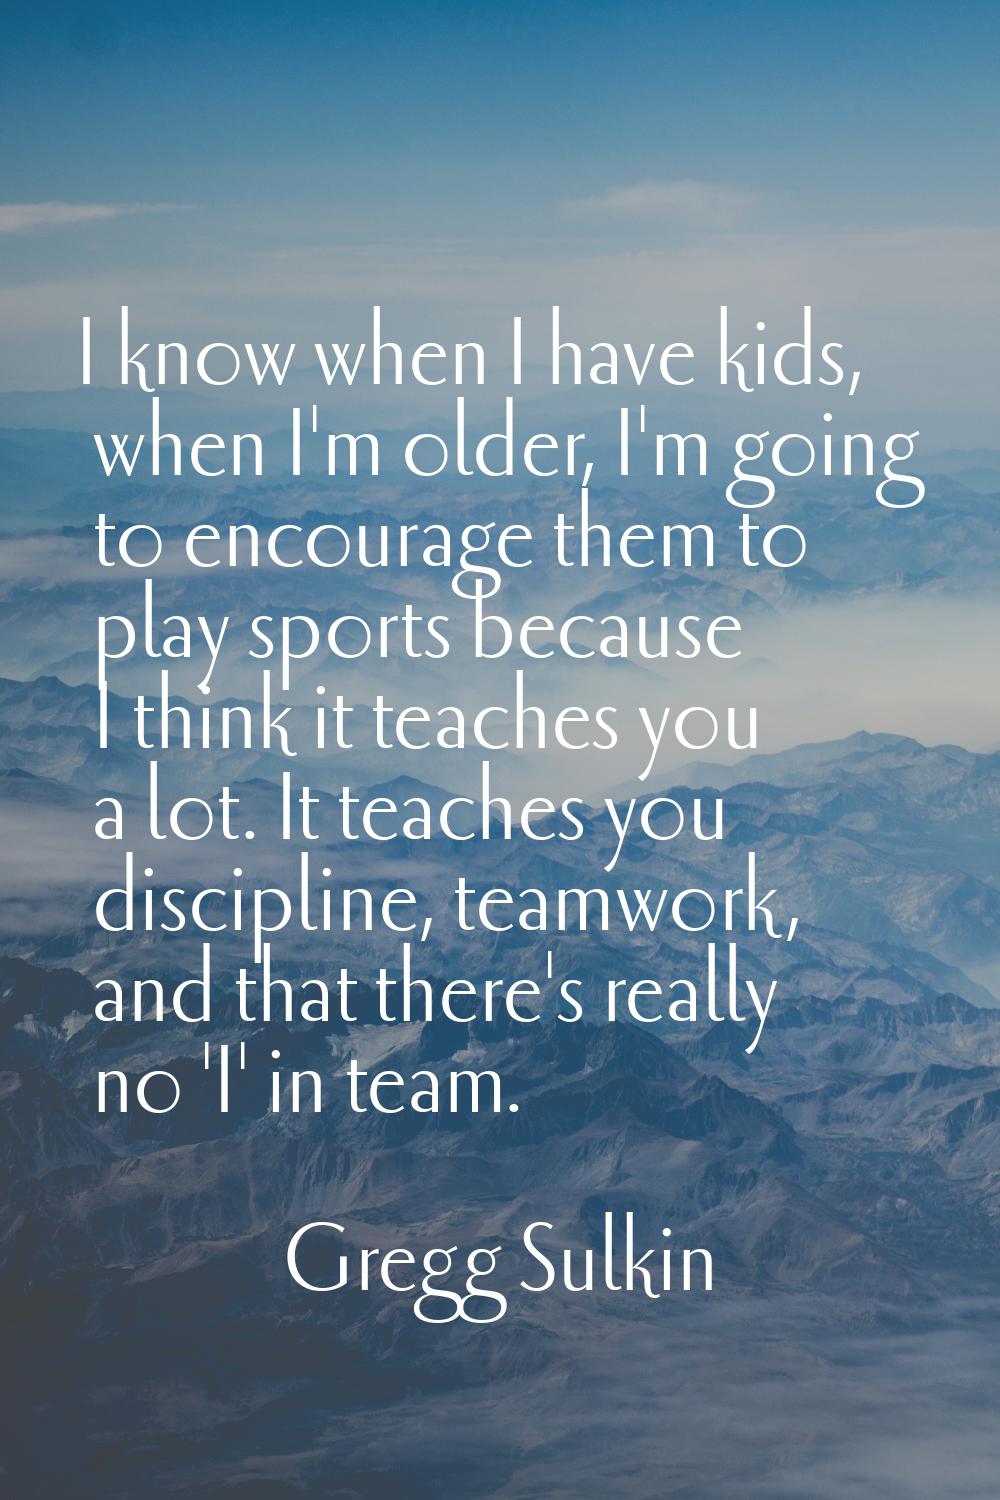 I know when I have kids, when I'm older, I'm going to encourage them to play sports because I think